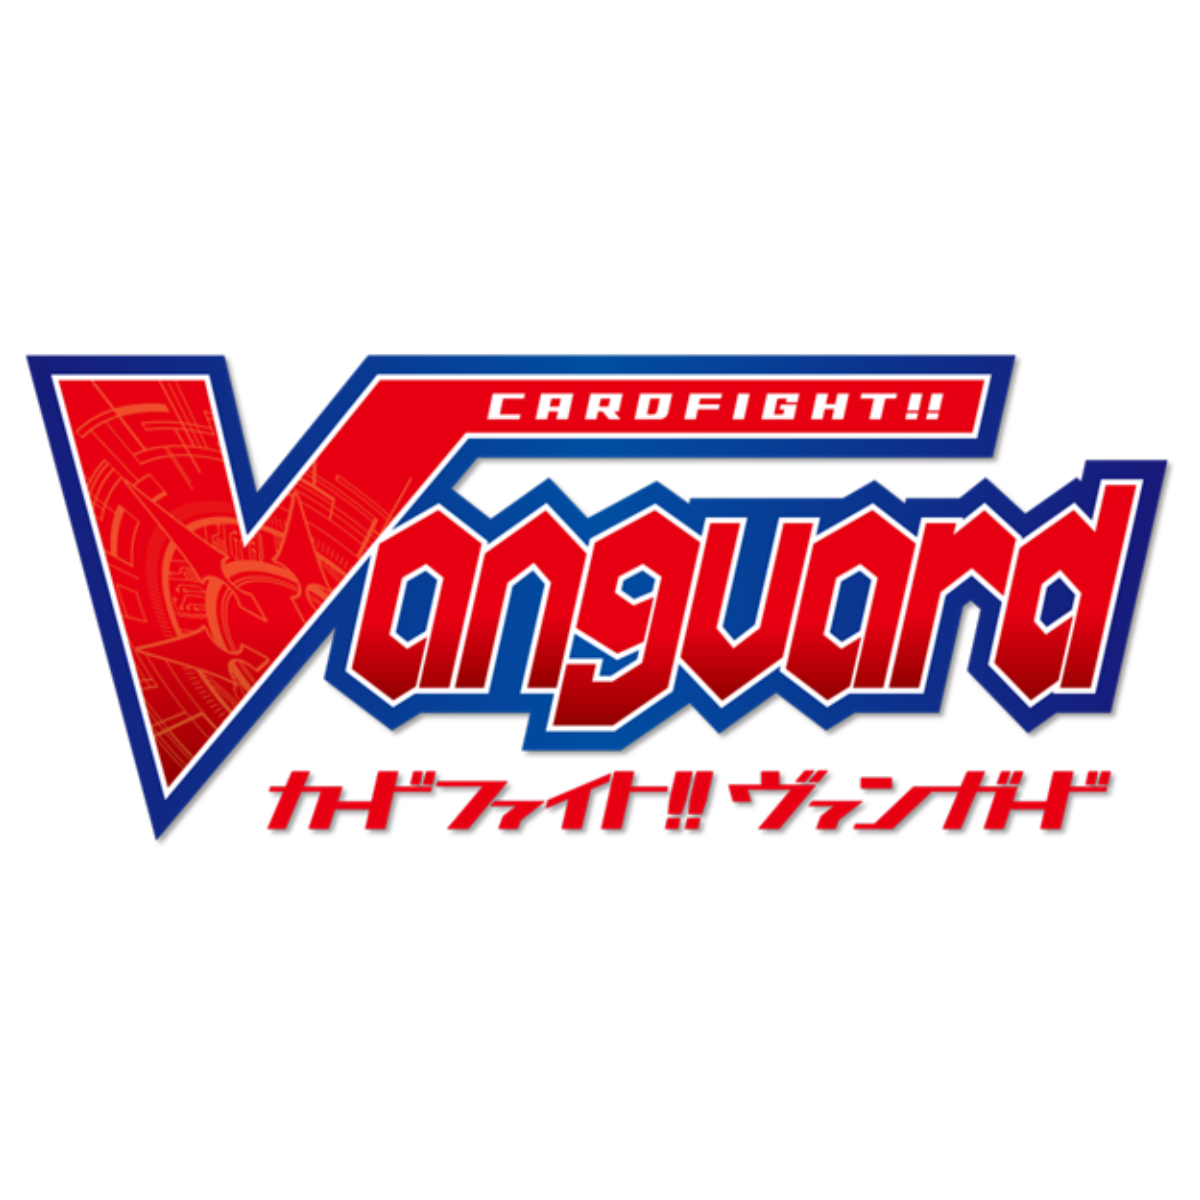 Cardfight!! Vanguard Special Series 05: Festival Booster 2023 [VG-D-SS05] (Japanese)-Booster Pack-Bushiroad-Ace Cards &amp; Collectibles